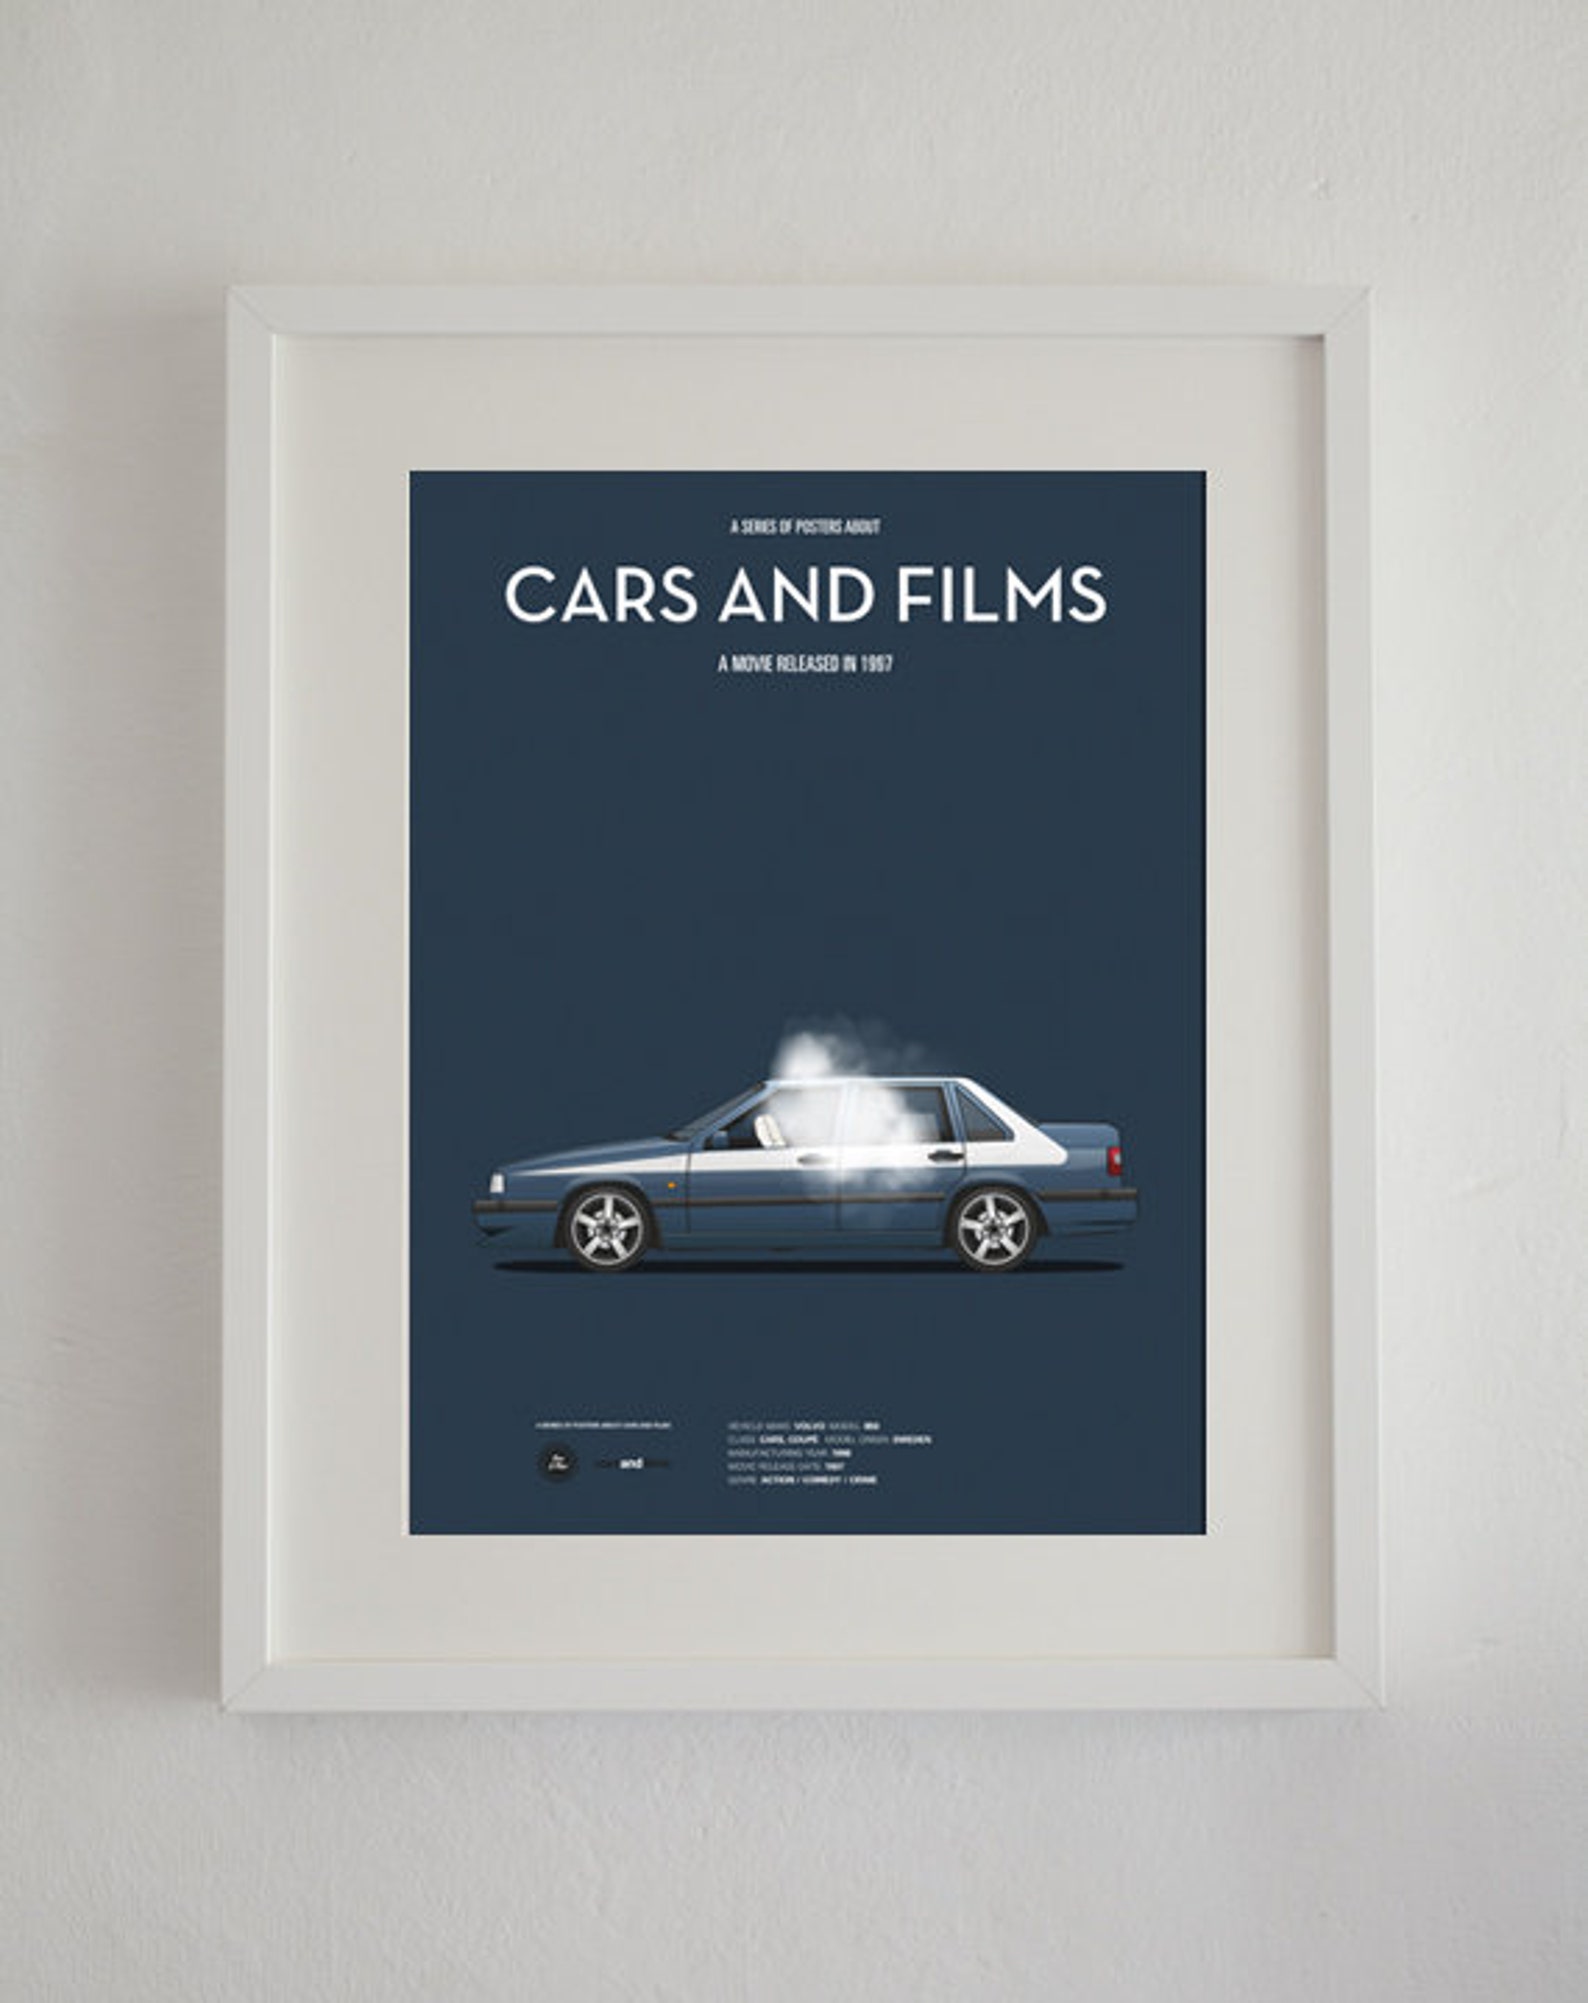 Airbag movie car poster art print A3 Cars And Films home